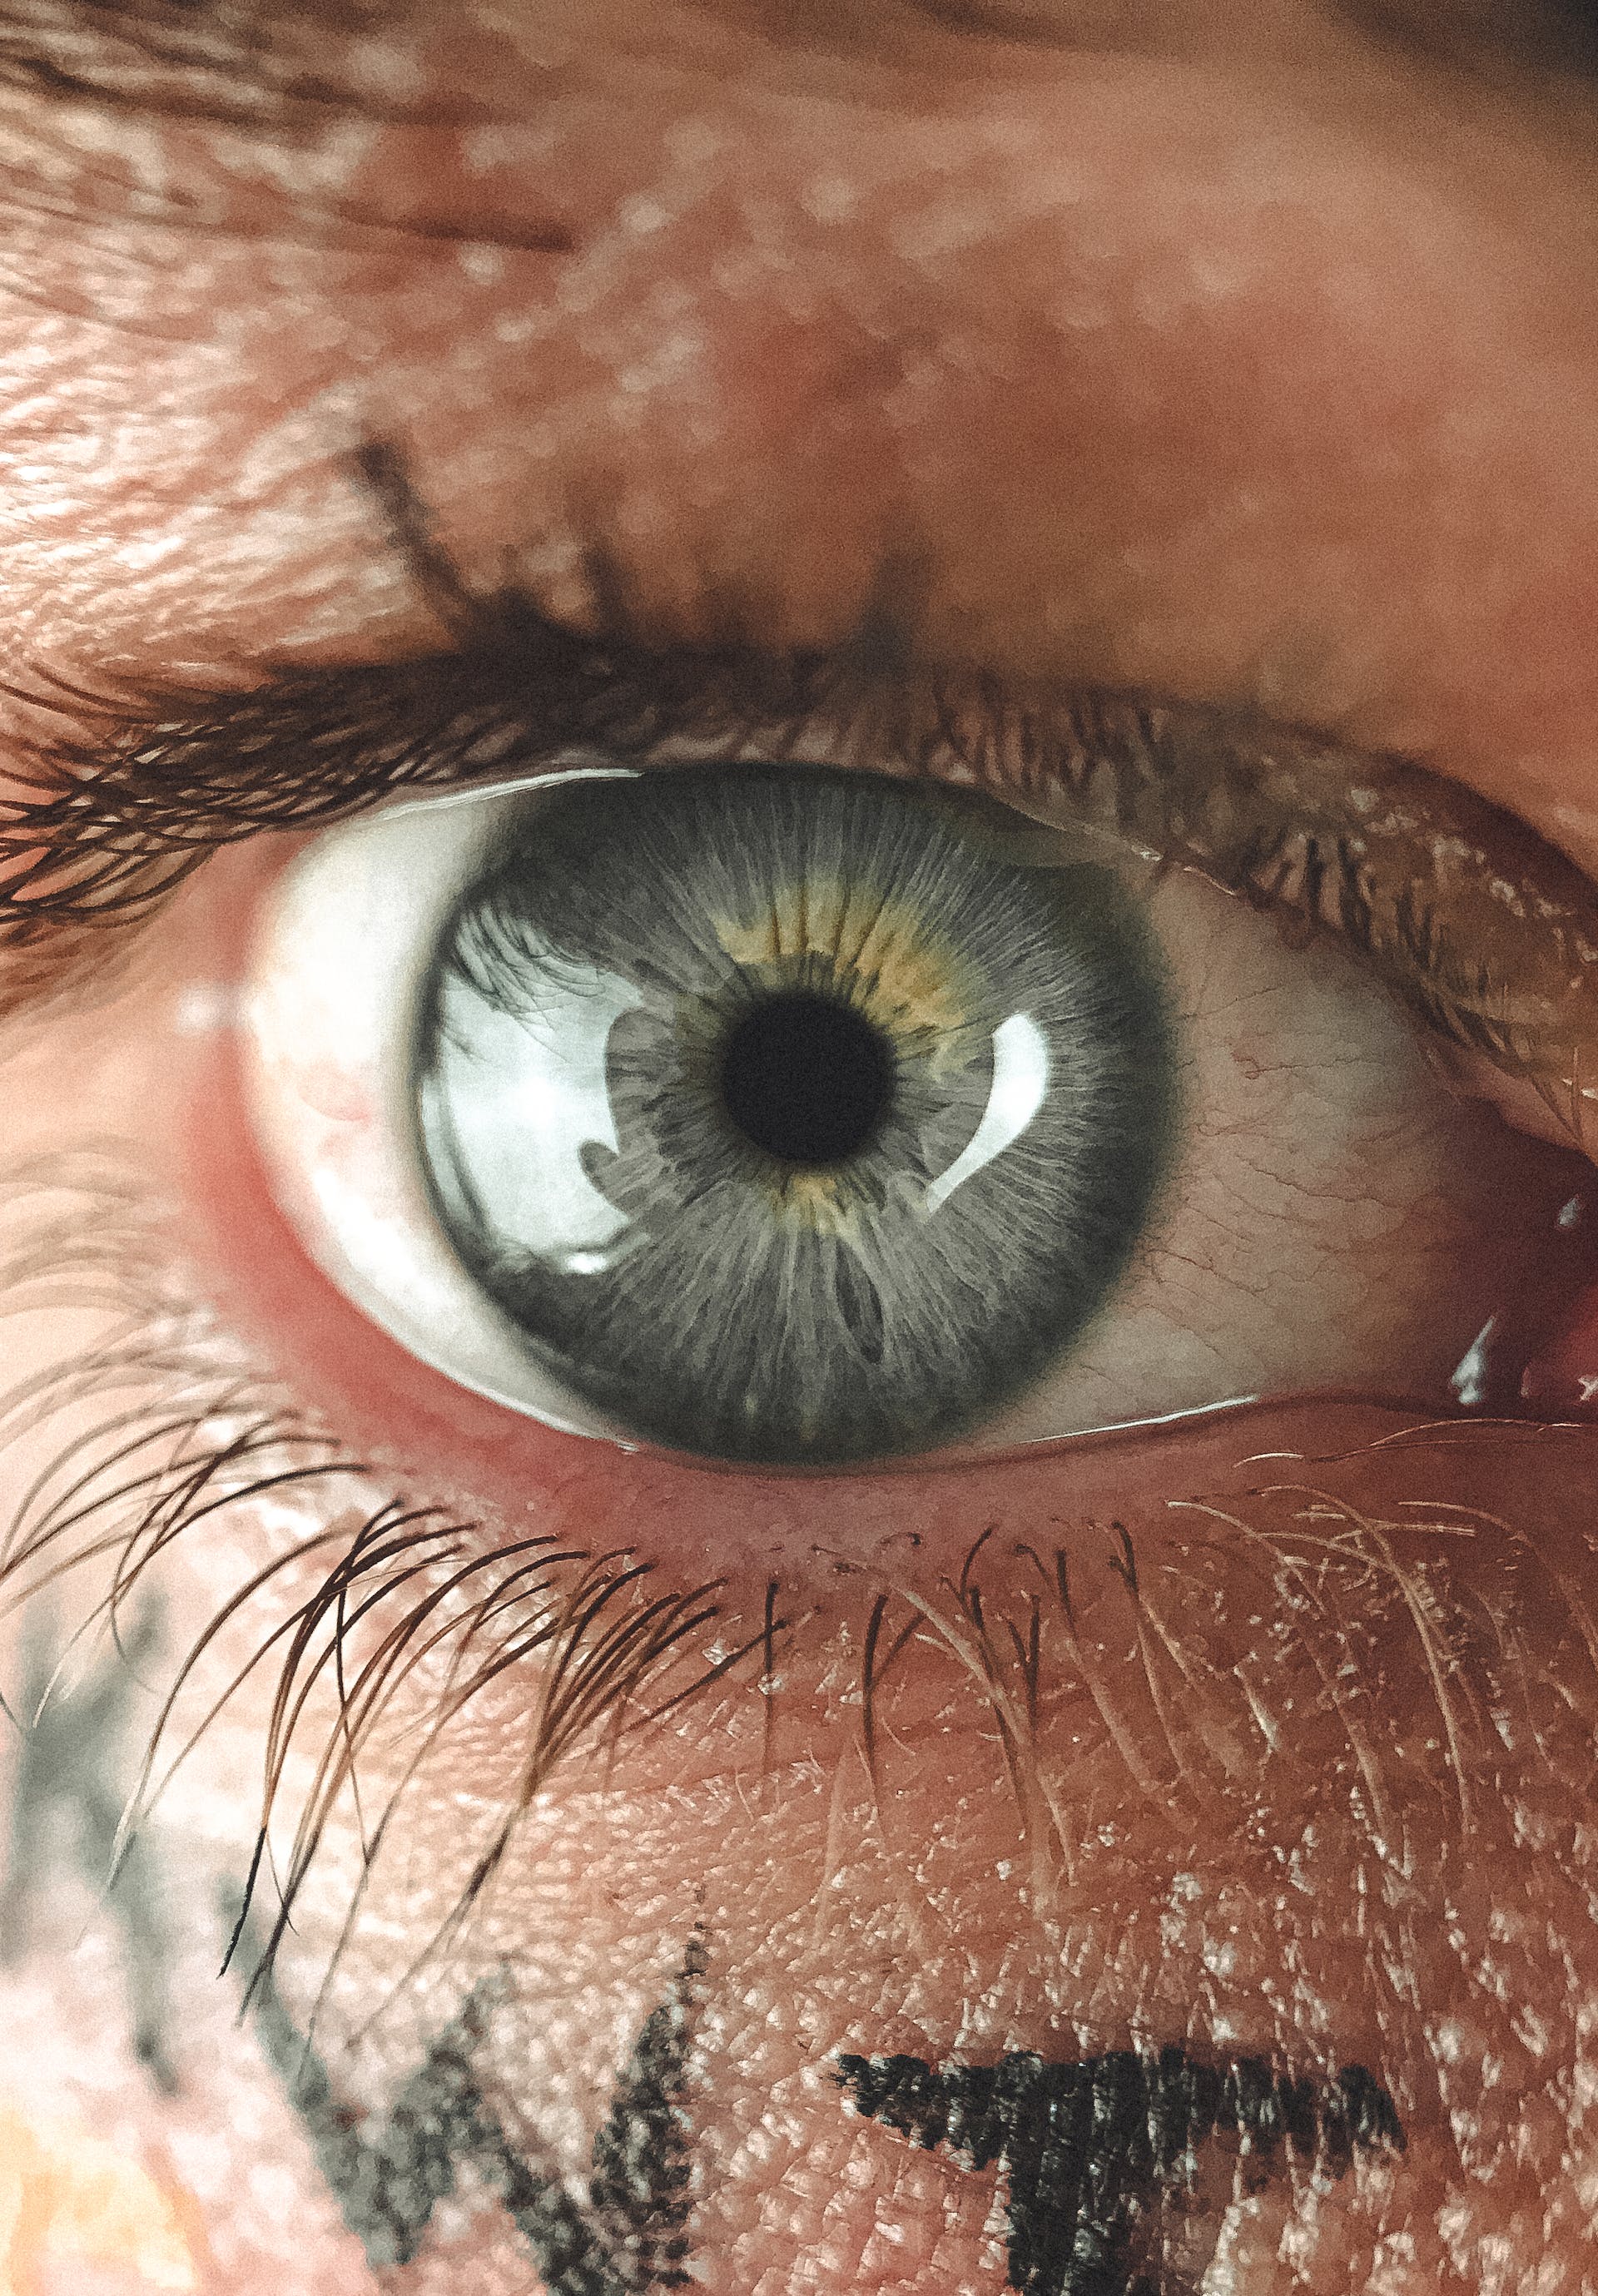 Close-up of a man's eye | Source: Pexels